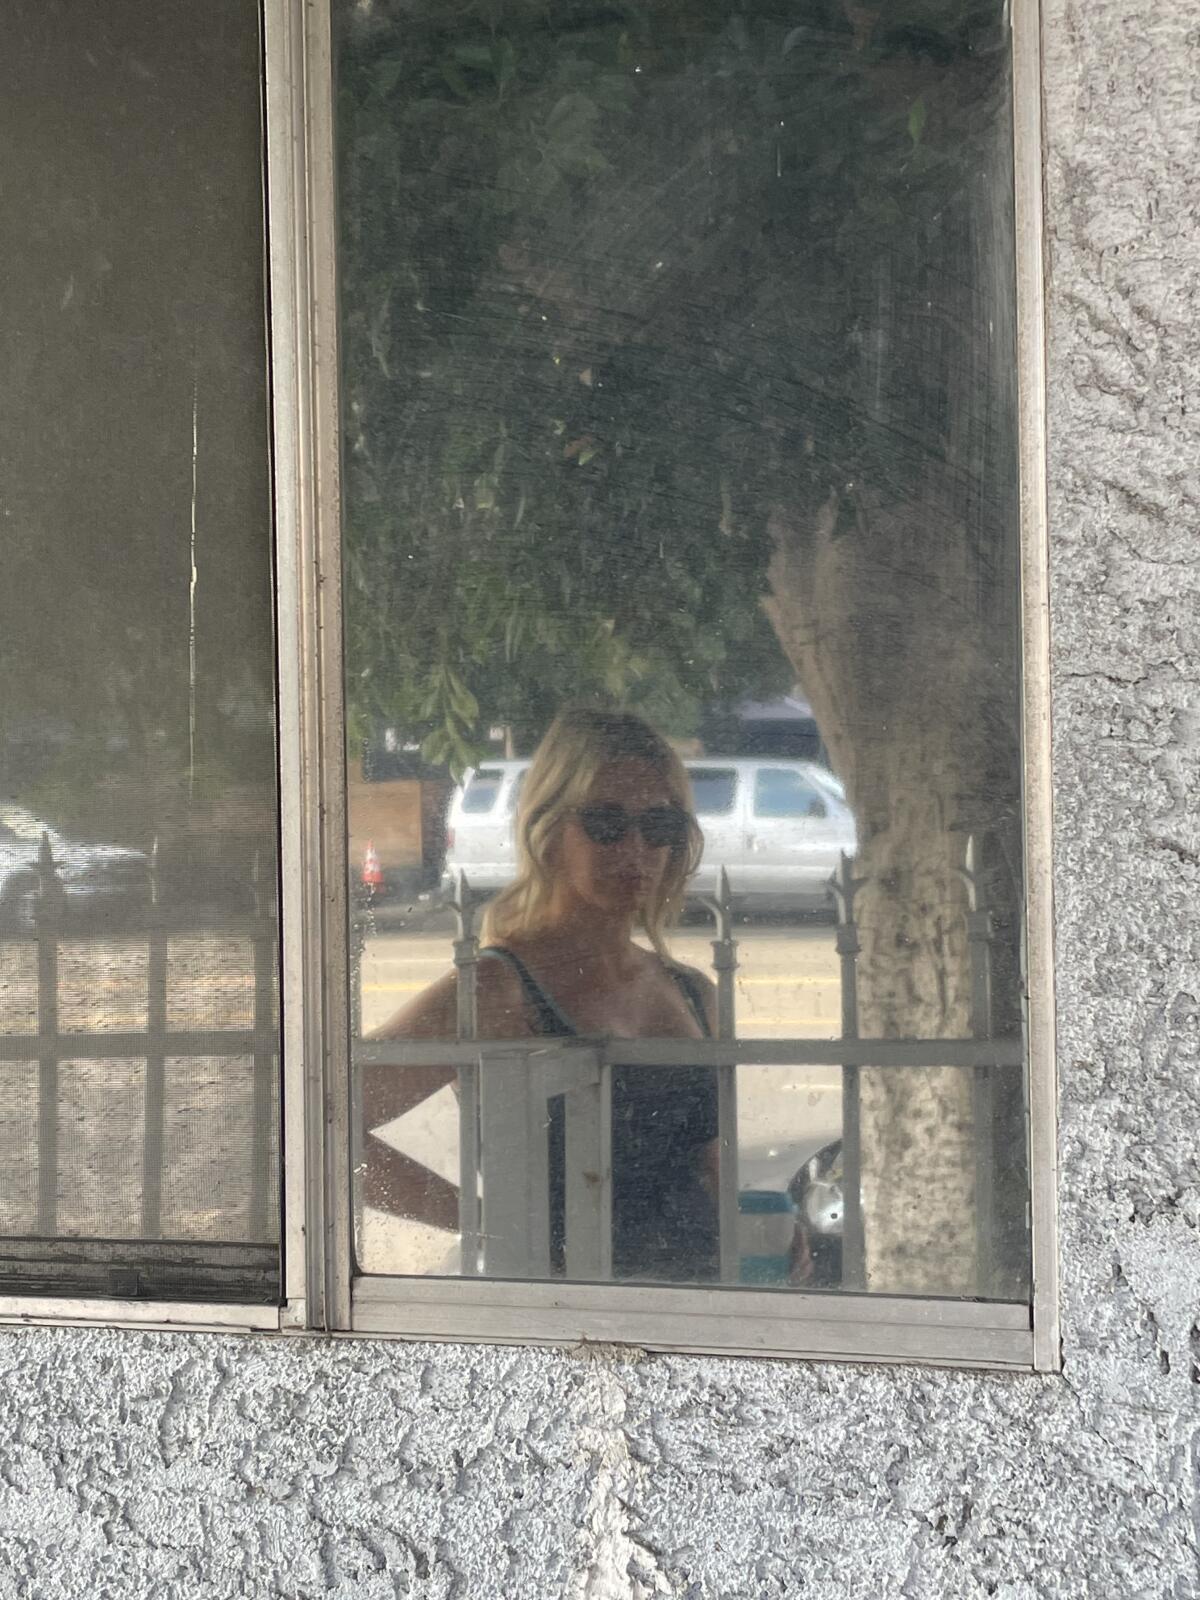 A woman reflected in a window while walking.